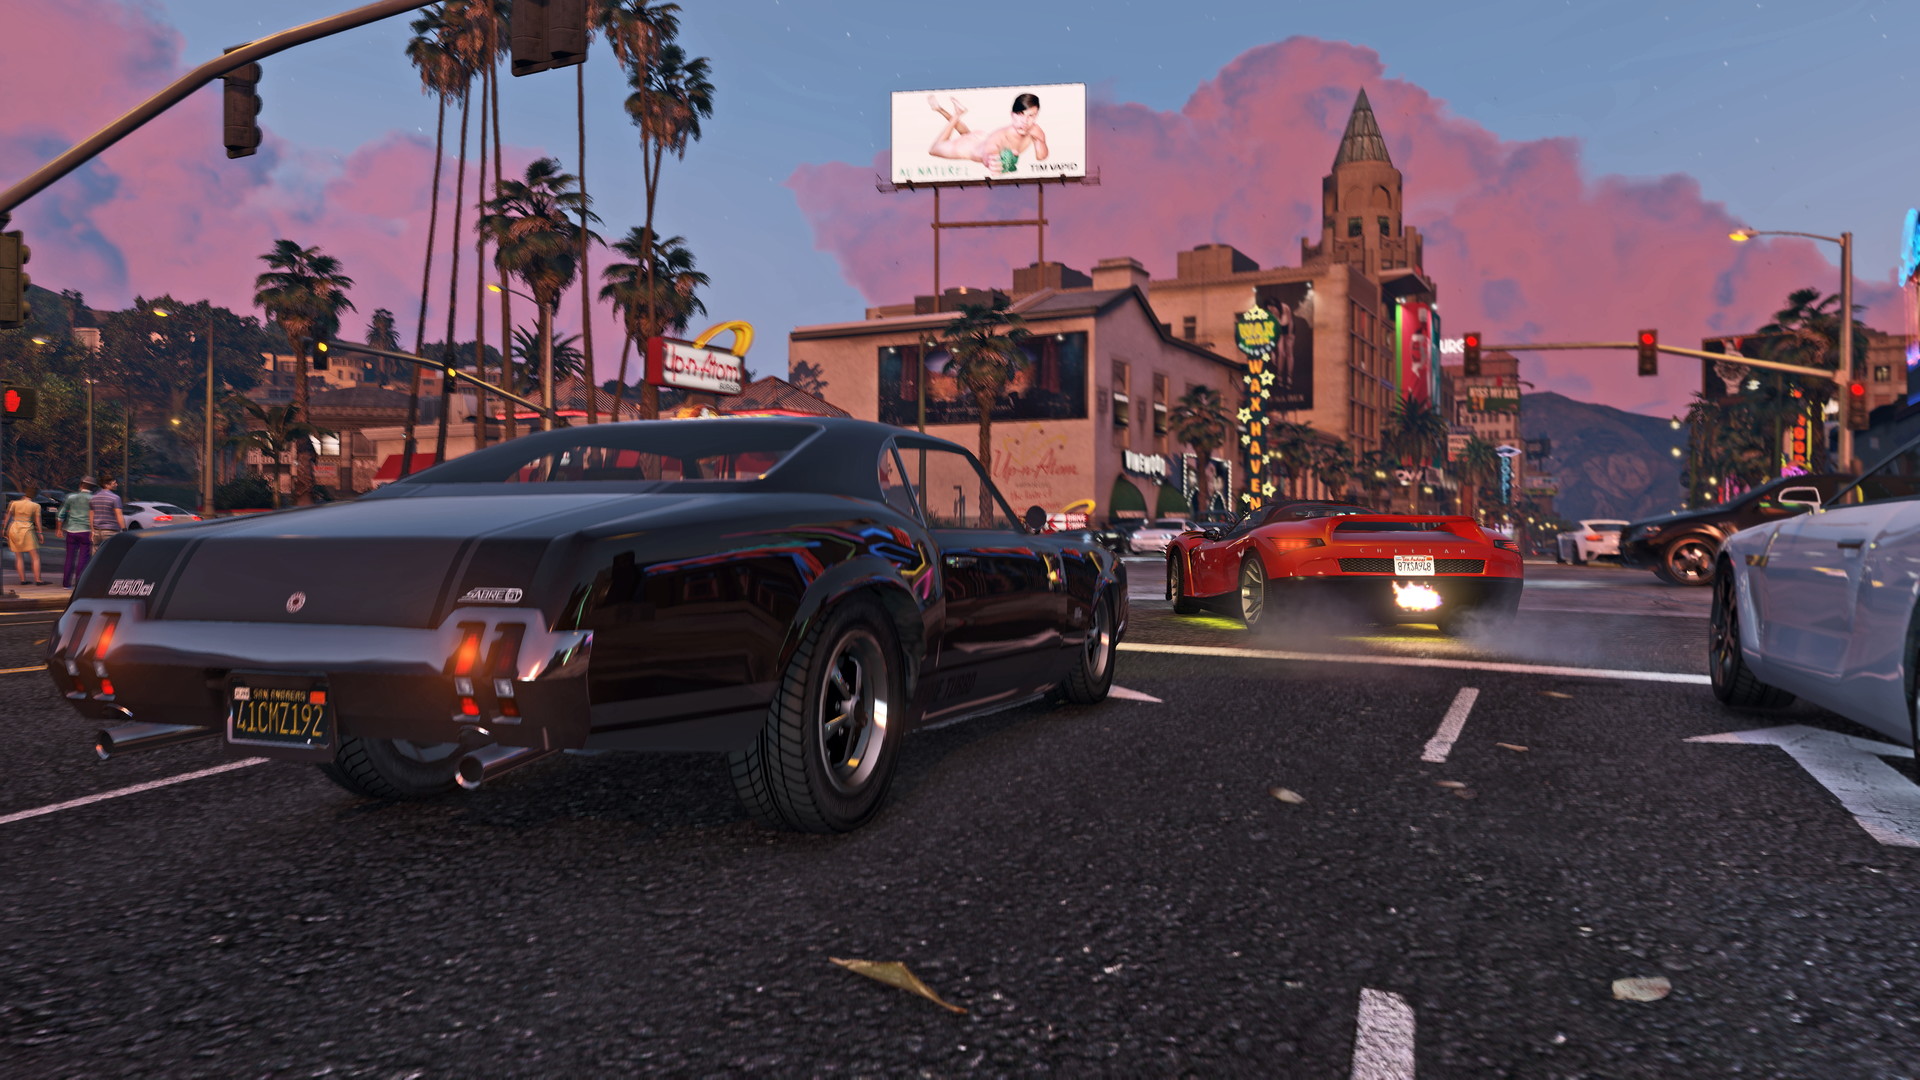 knoop stuk Actie GTA 5 cheats: all the codes from free cash to wanted stars | TechRadar